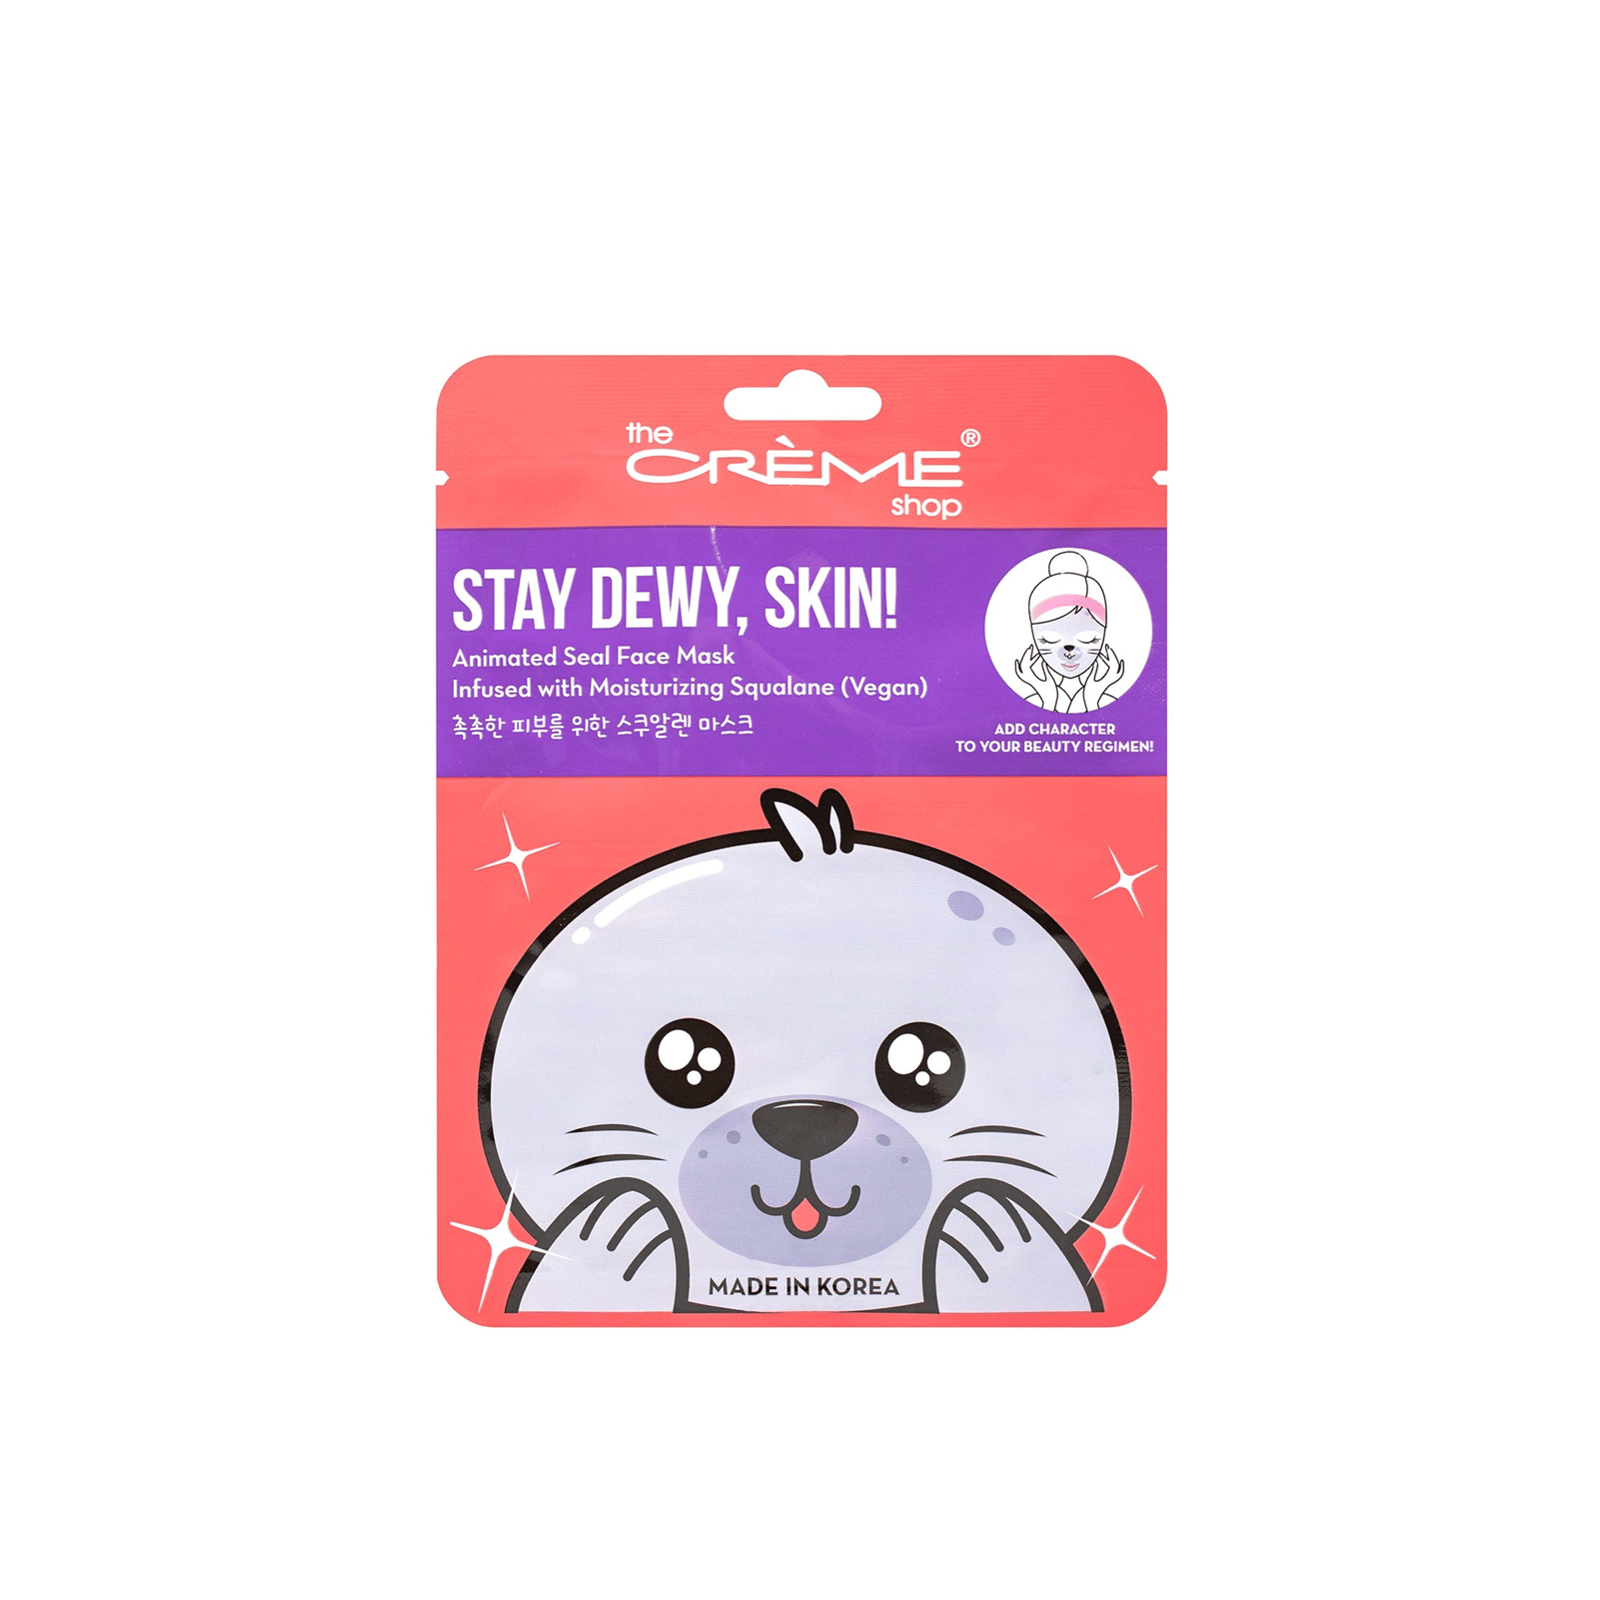 The Crème Shop Stay Dewy, Skin! Animated Seal Face Mask 25g (0.88 oz)